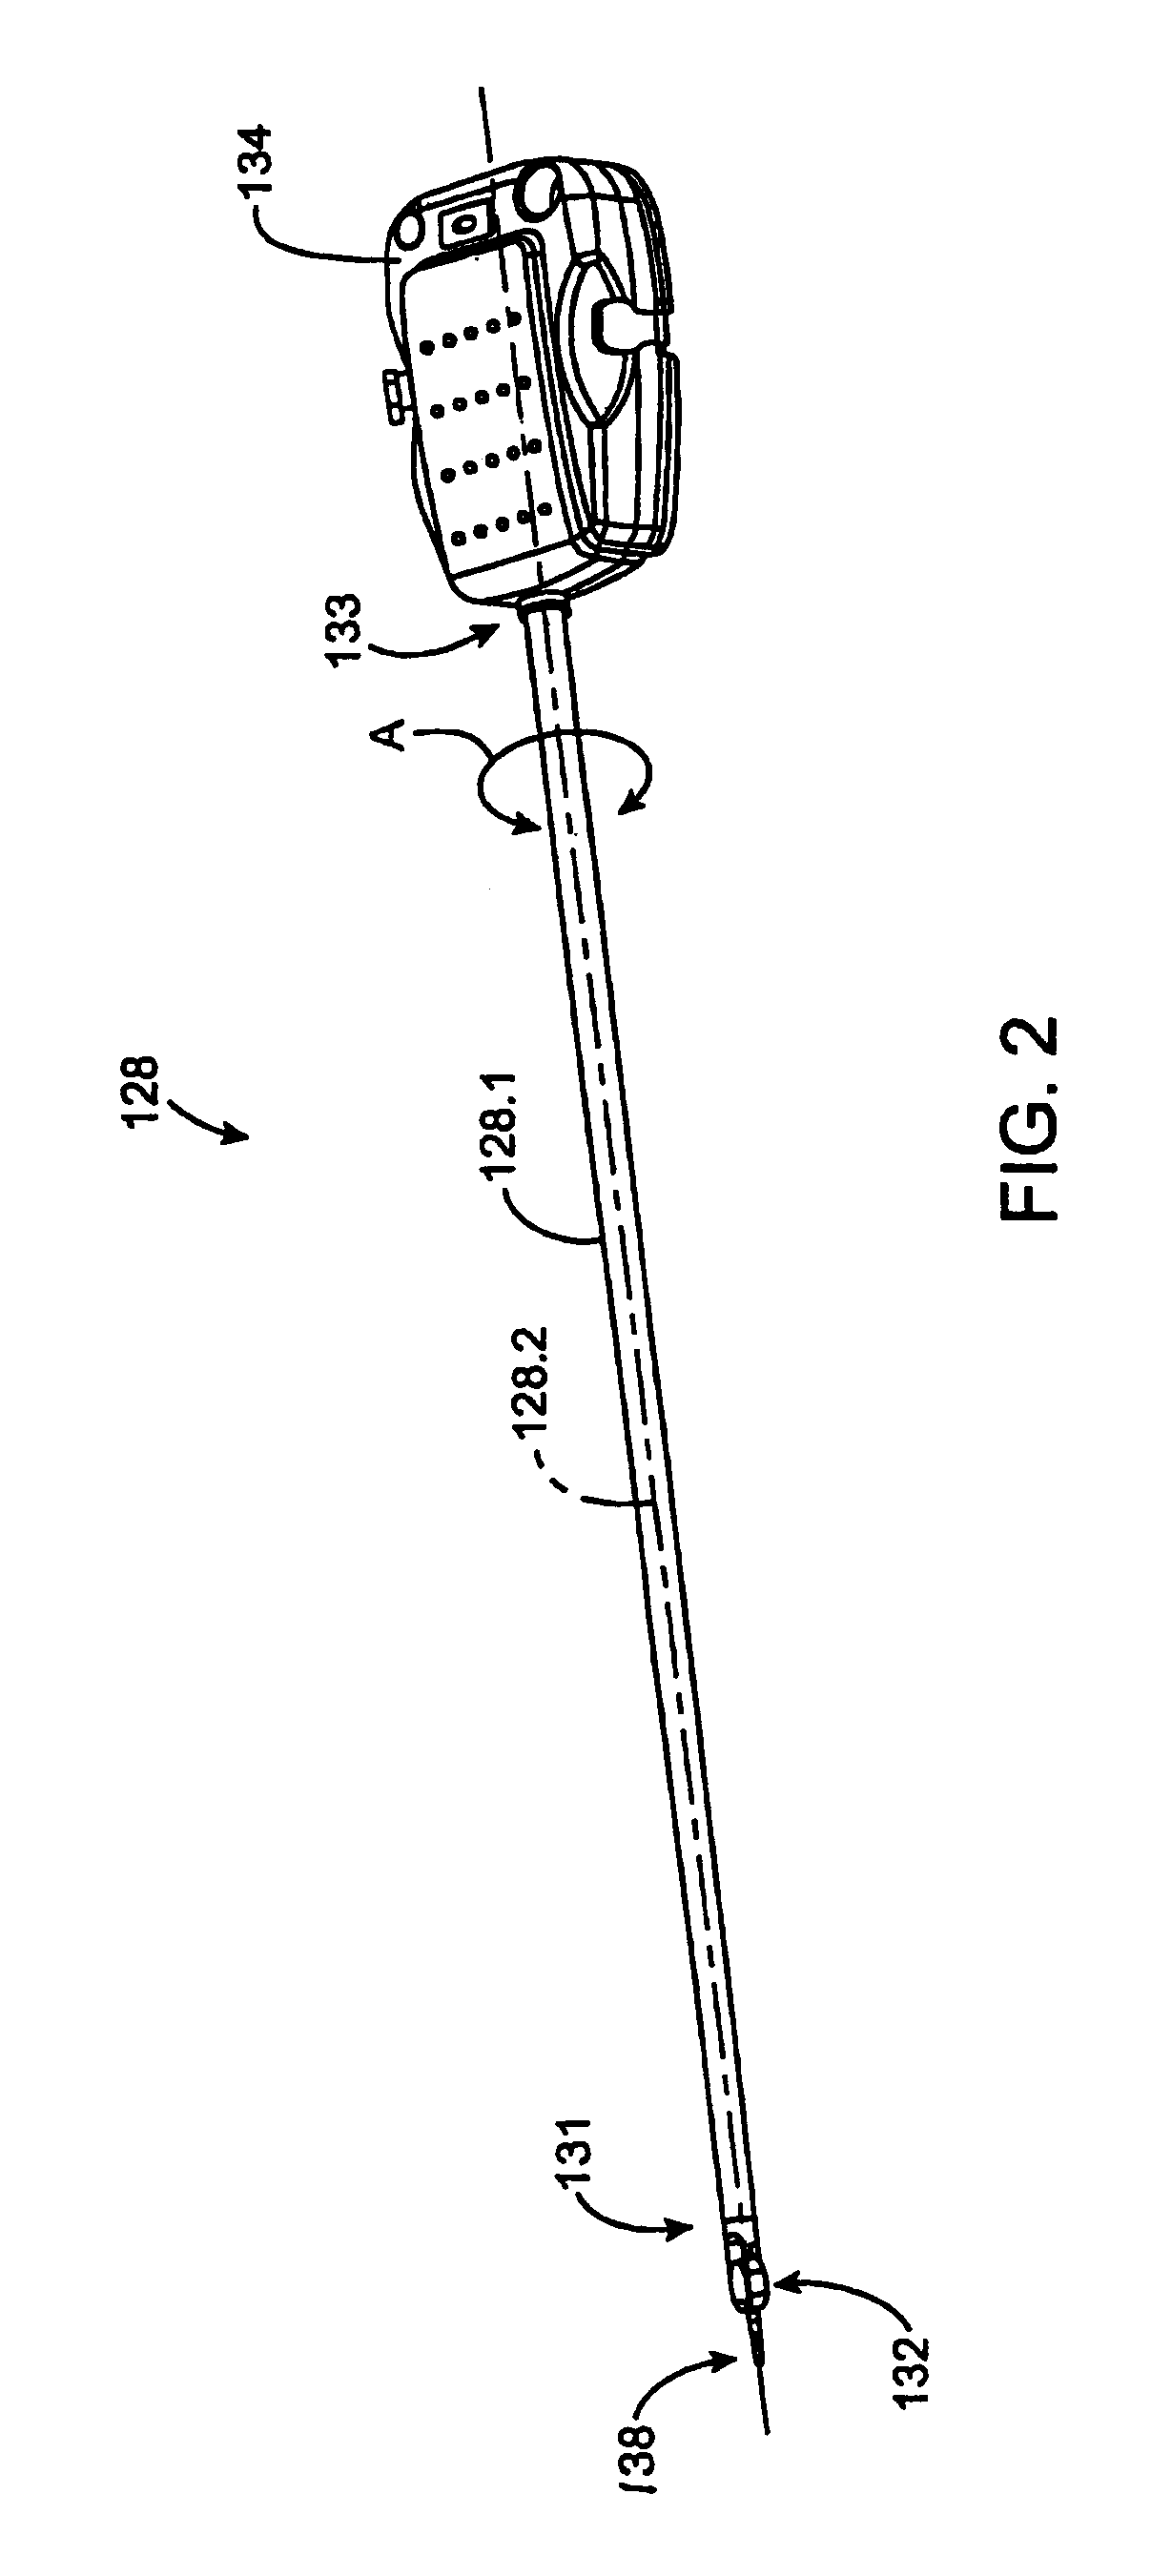 Surgical tool having electrocautery energy supply conductor with inhibited current leakage